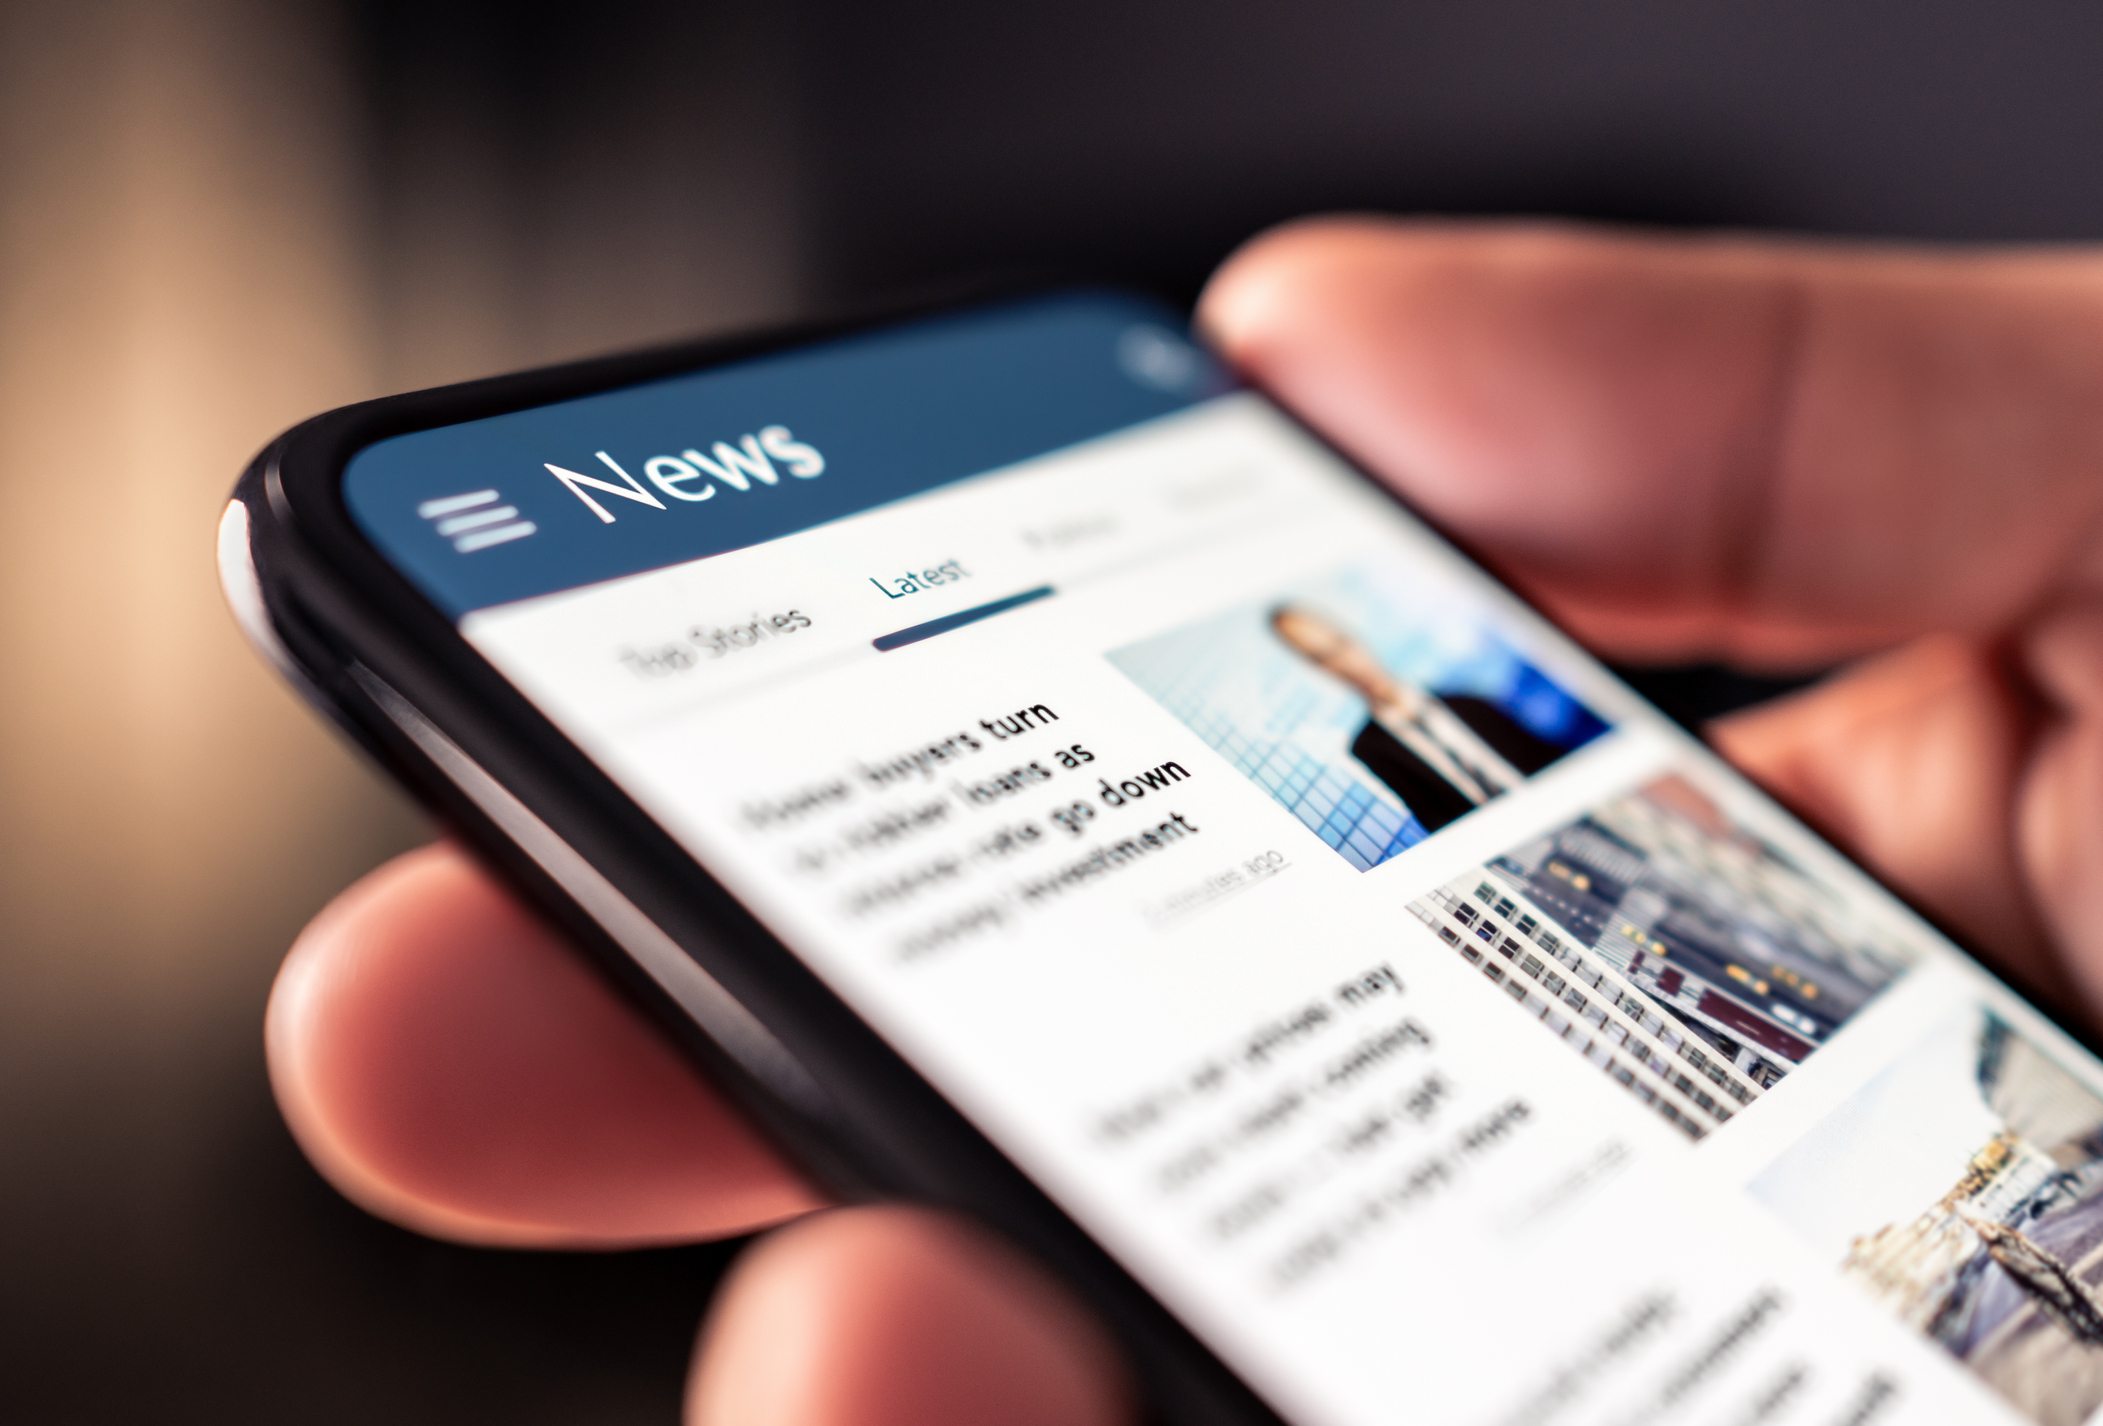 Reading news releases on mobile device